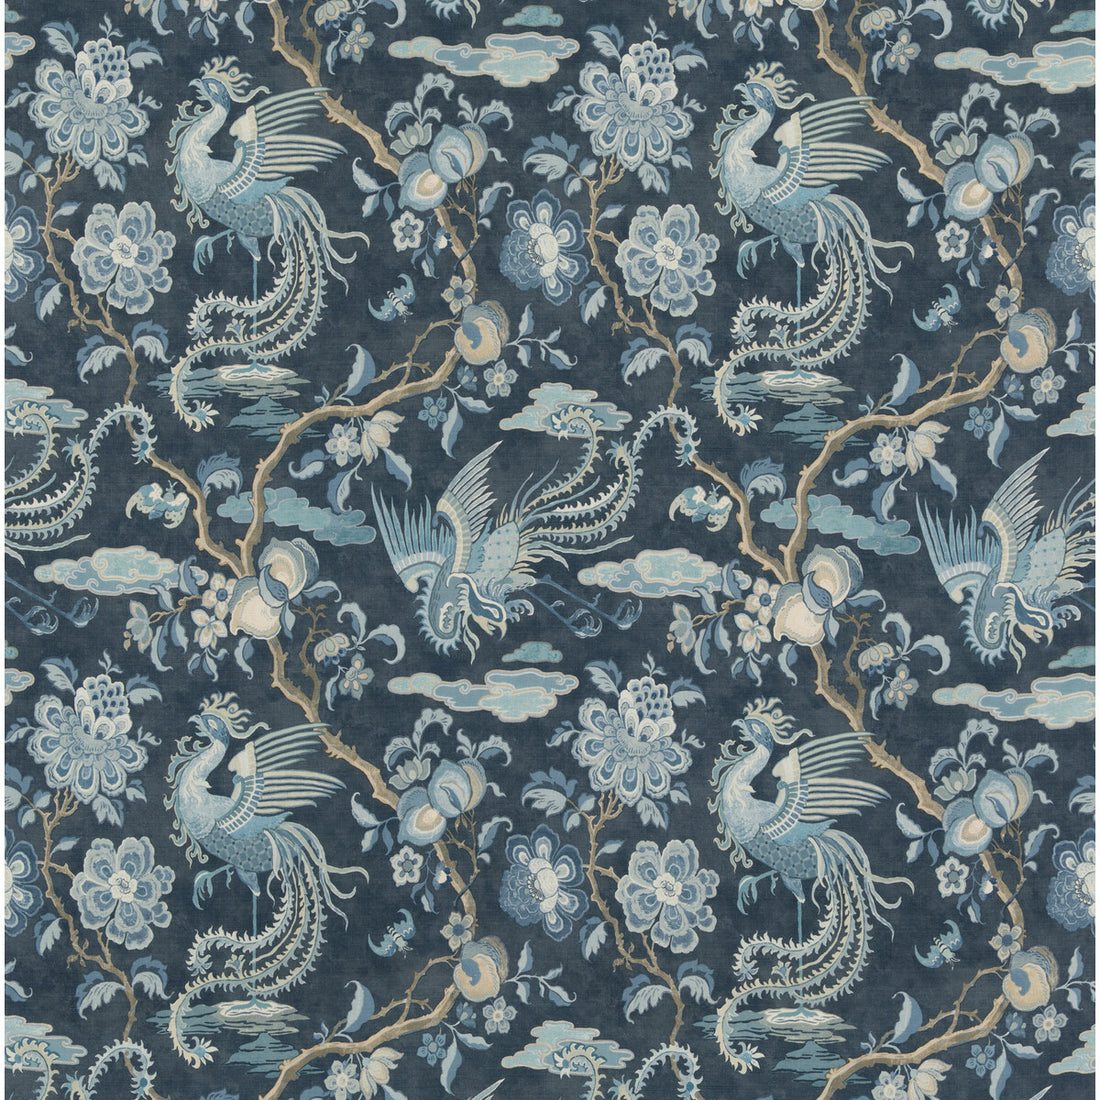 Chifu fabric in indigo color - pattern BP10852.1.0 - by G P &amp; J Baker in the Chifu collection